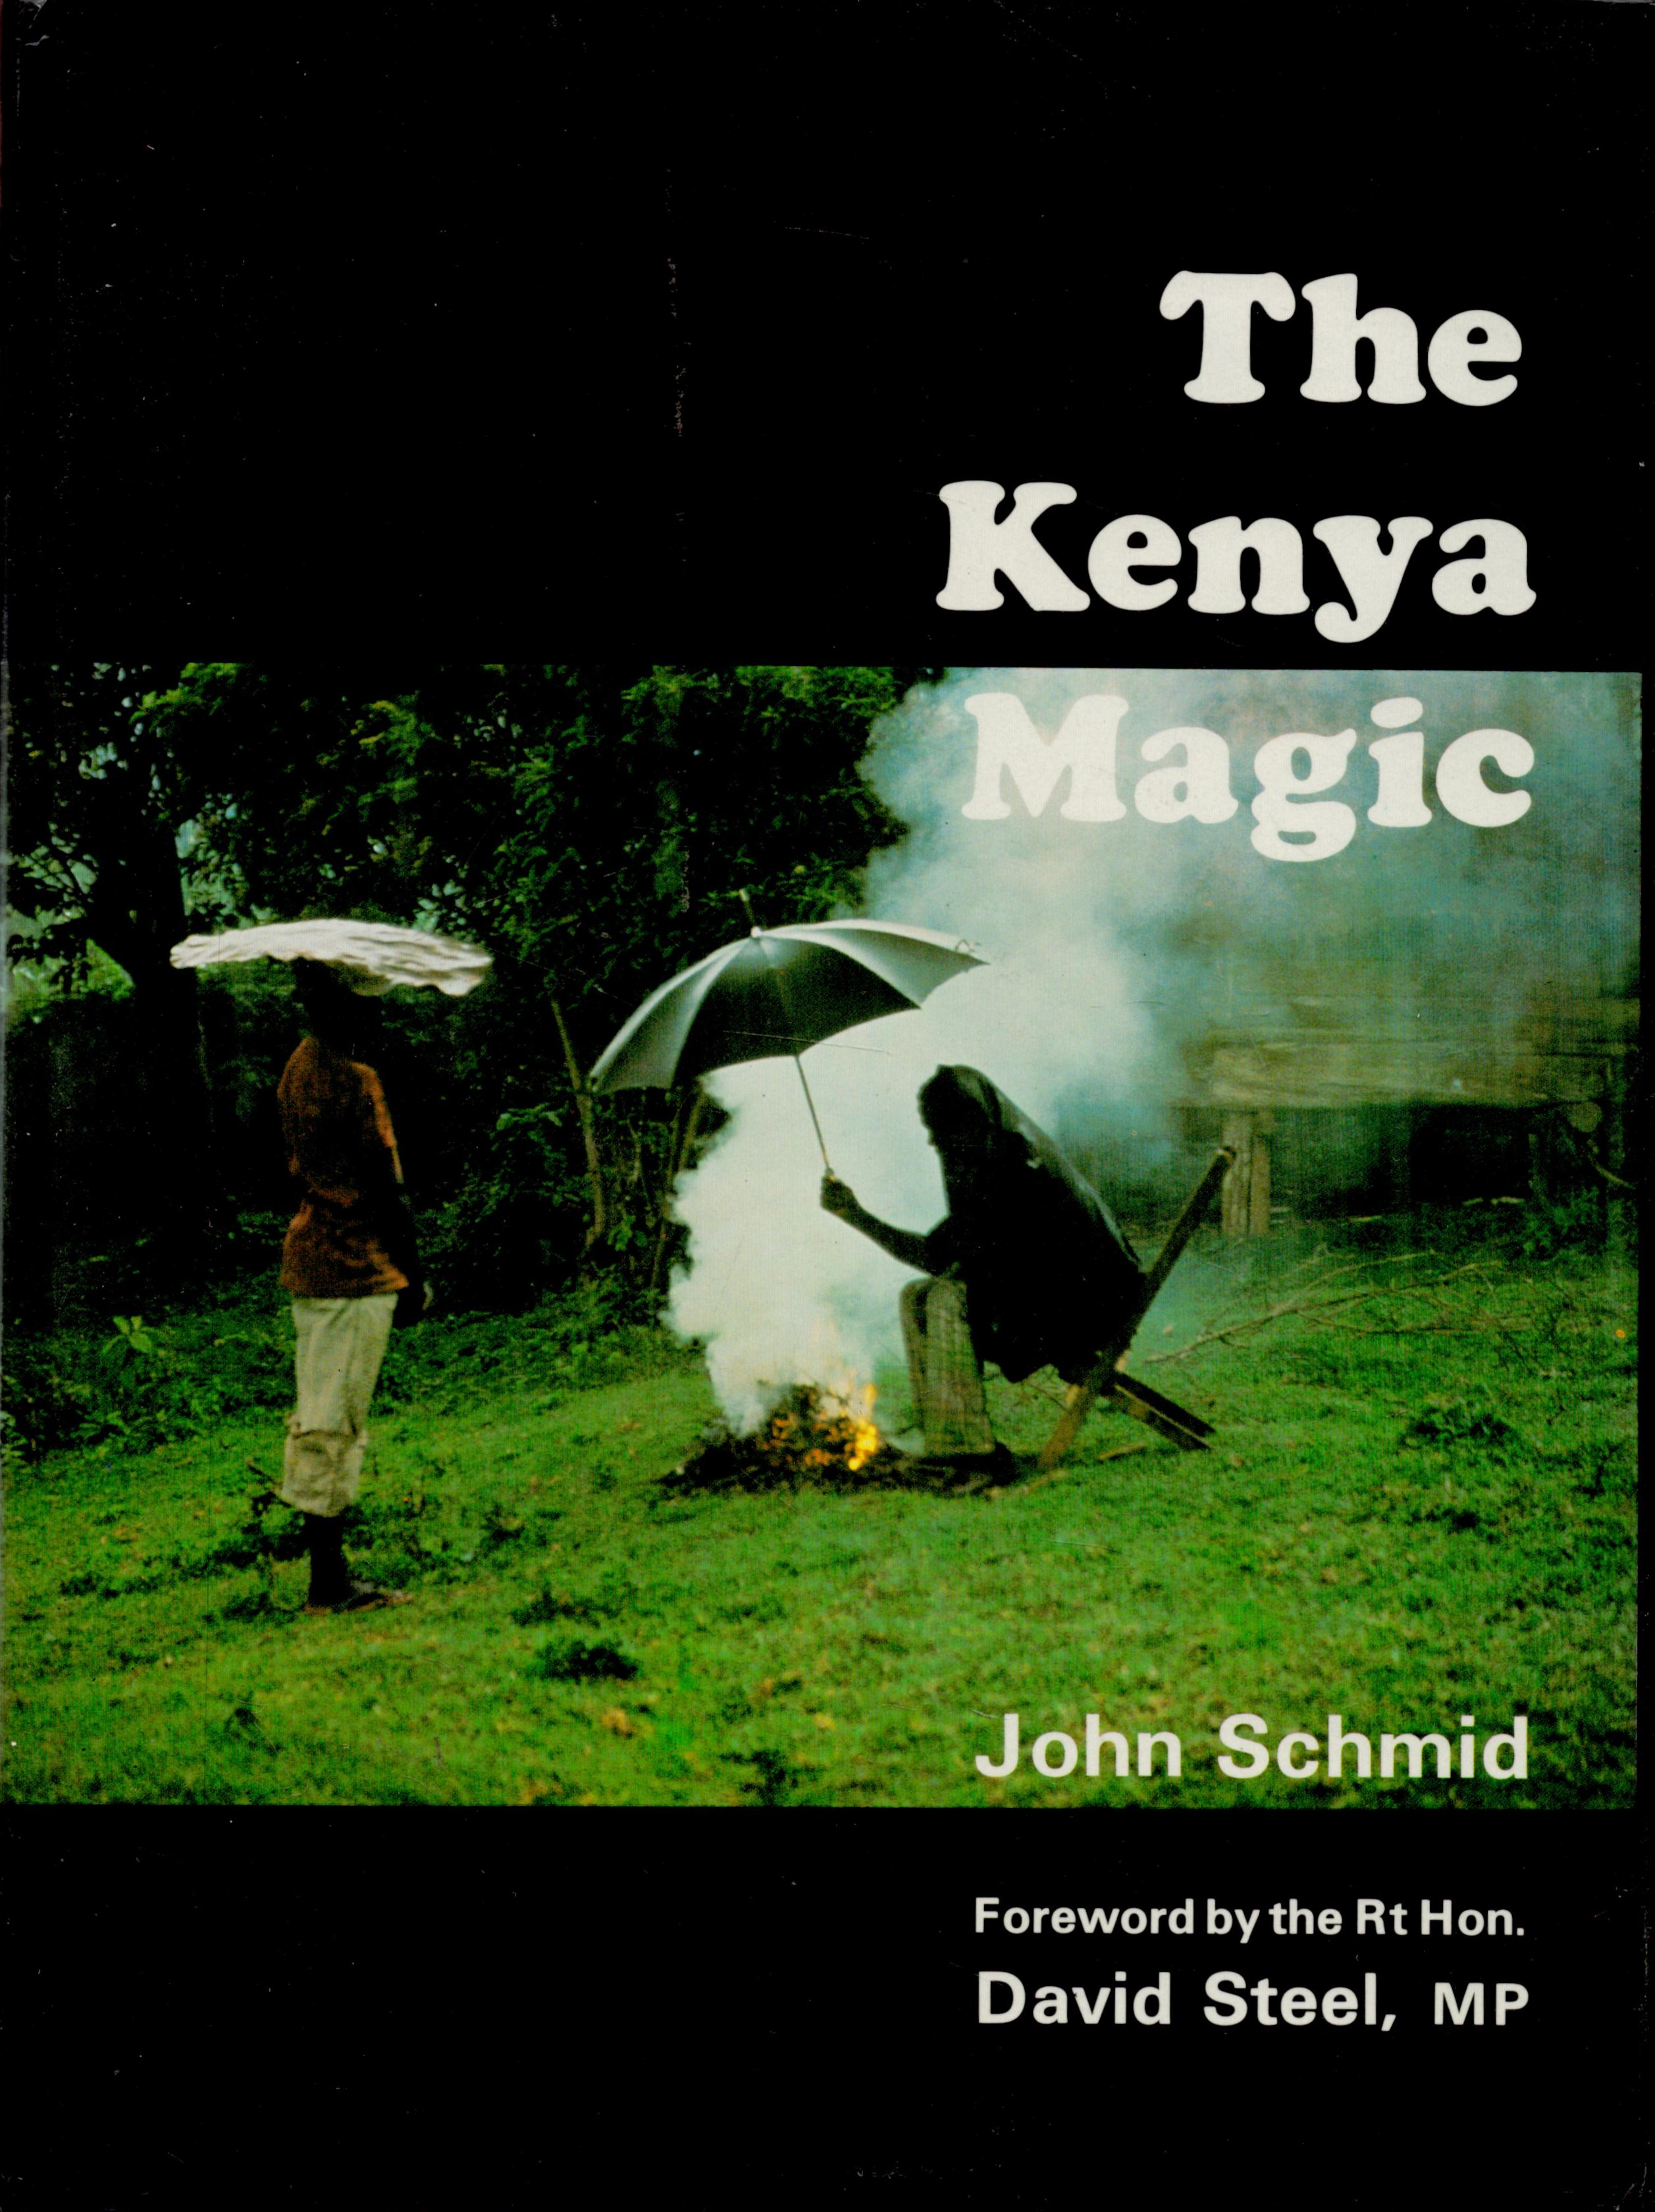 The Kenya Magic by John Schmid 1983 First Edition Hardback Book with 192 pages published by